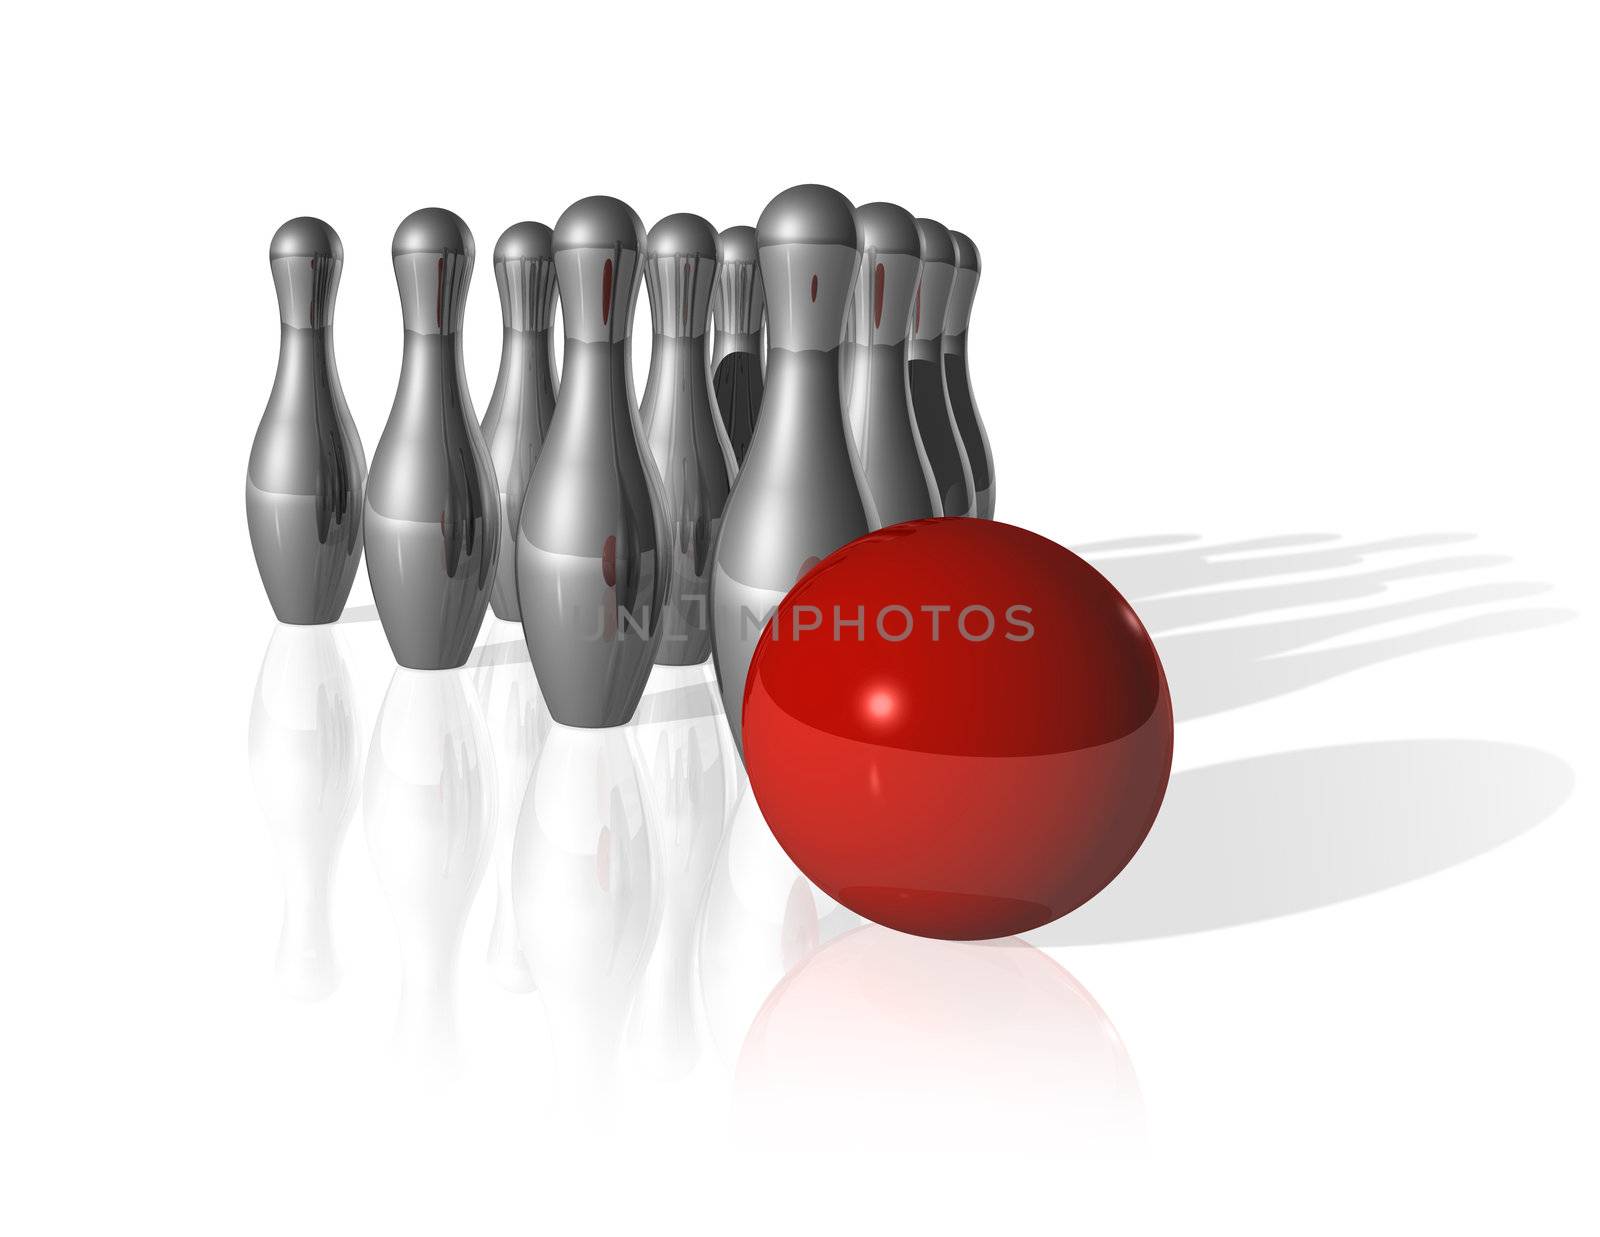 ten metal bowling skittles and red ball on white background - three dimensional illustration